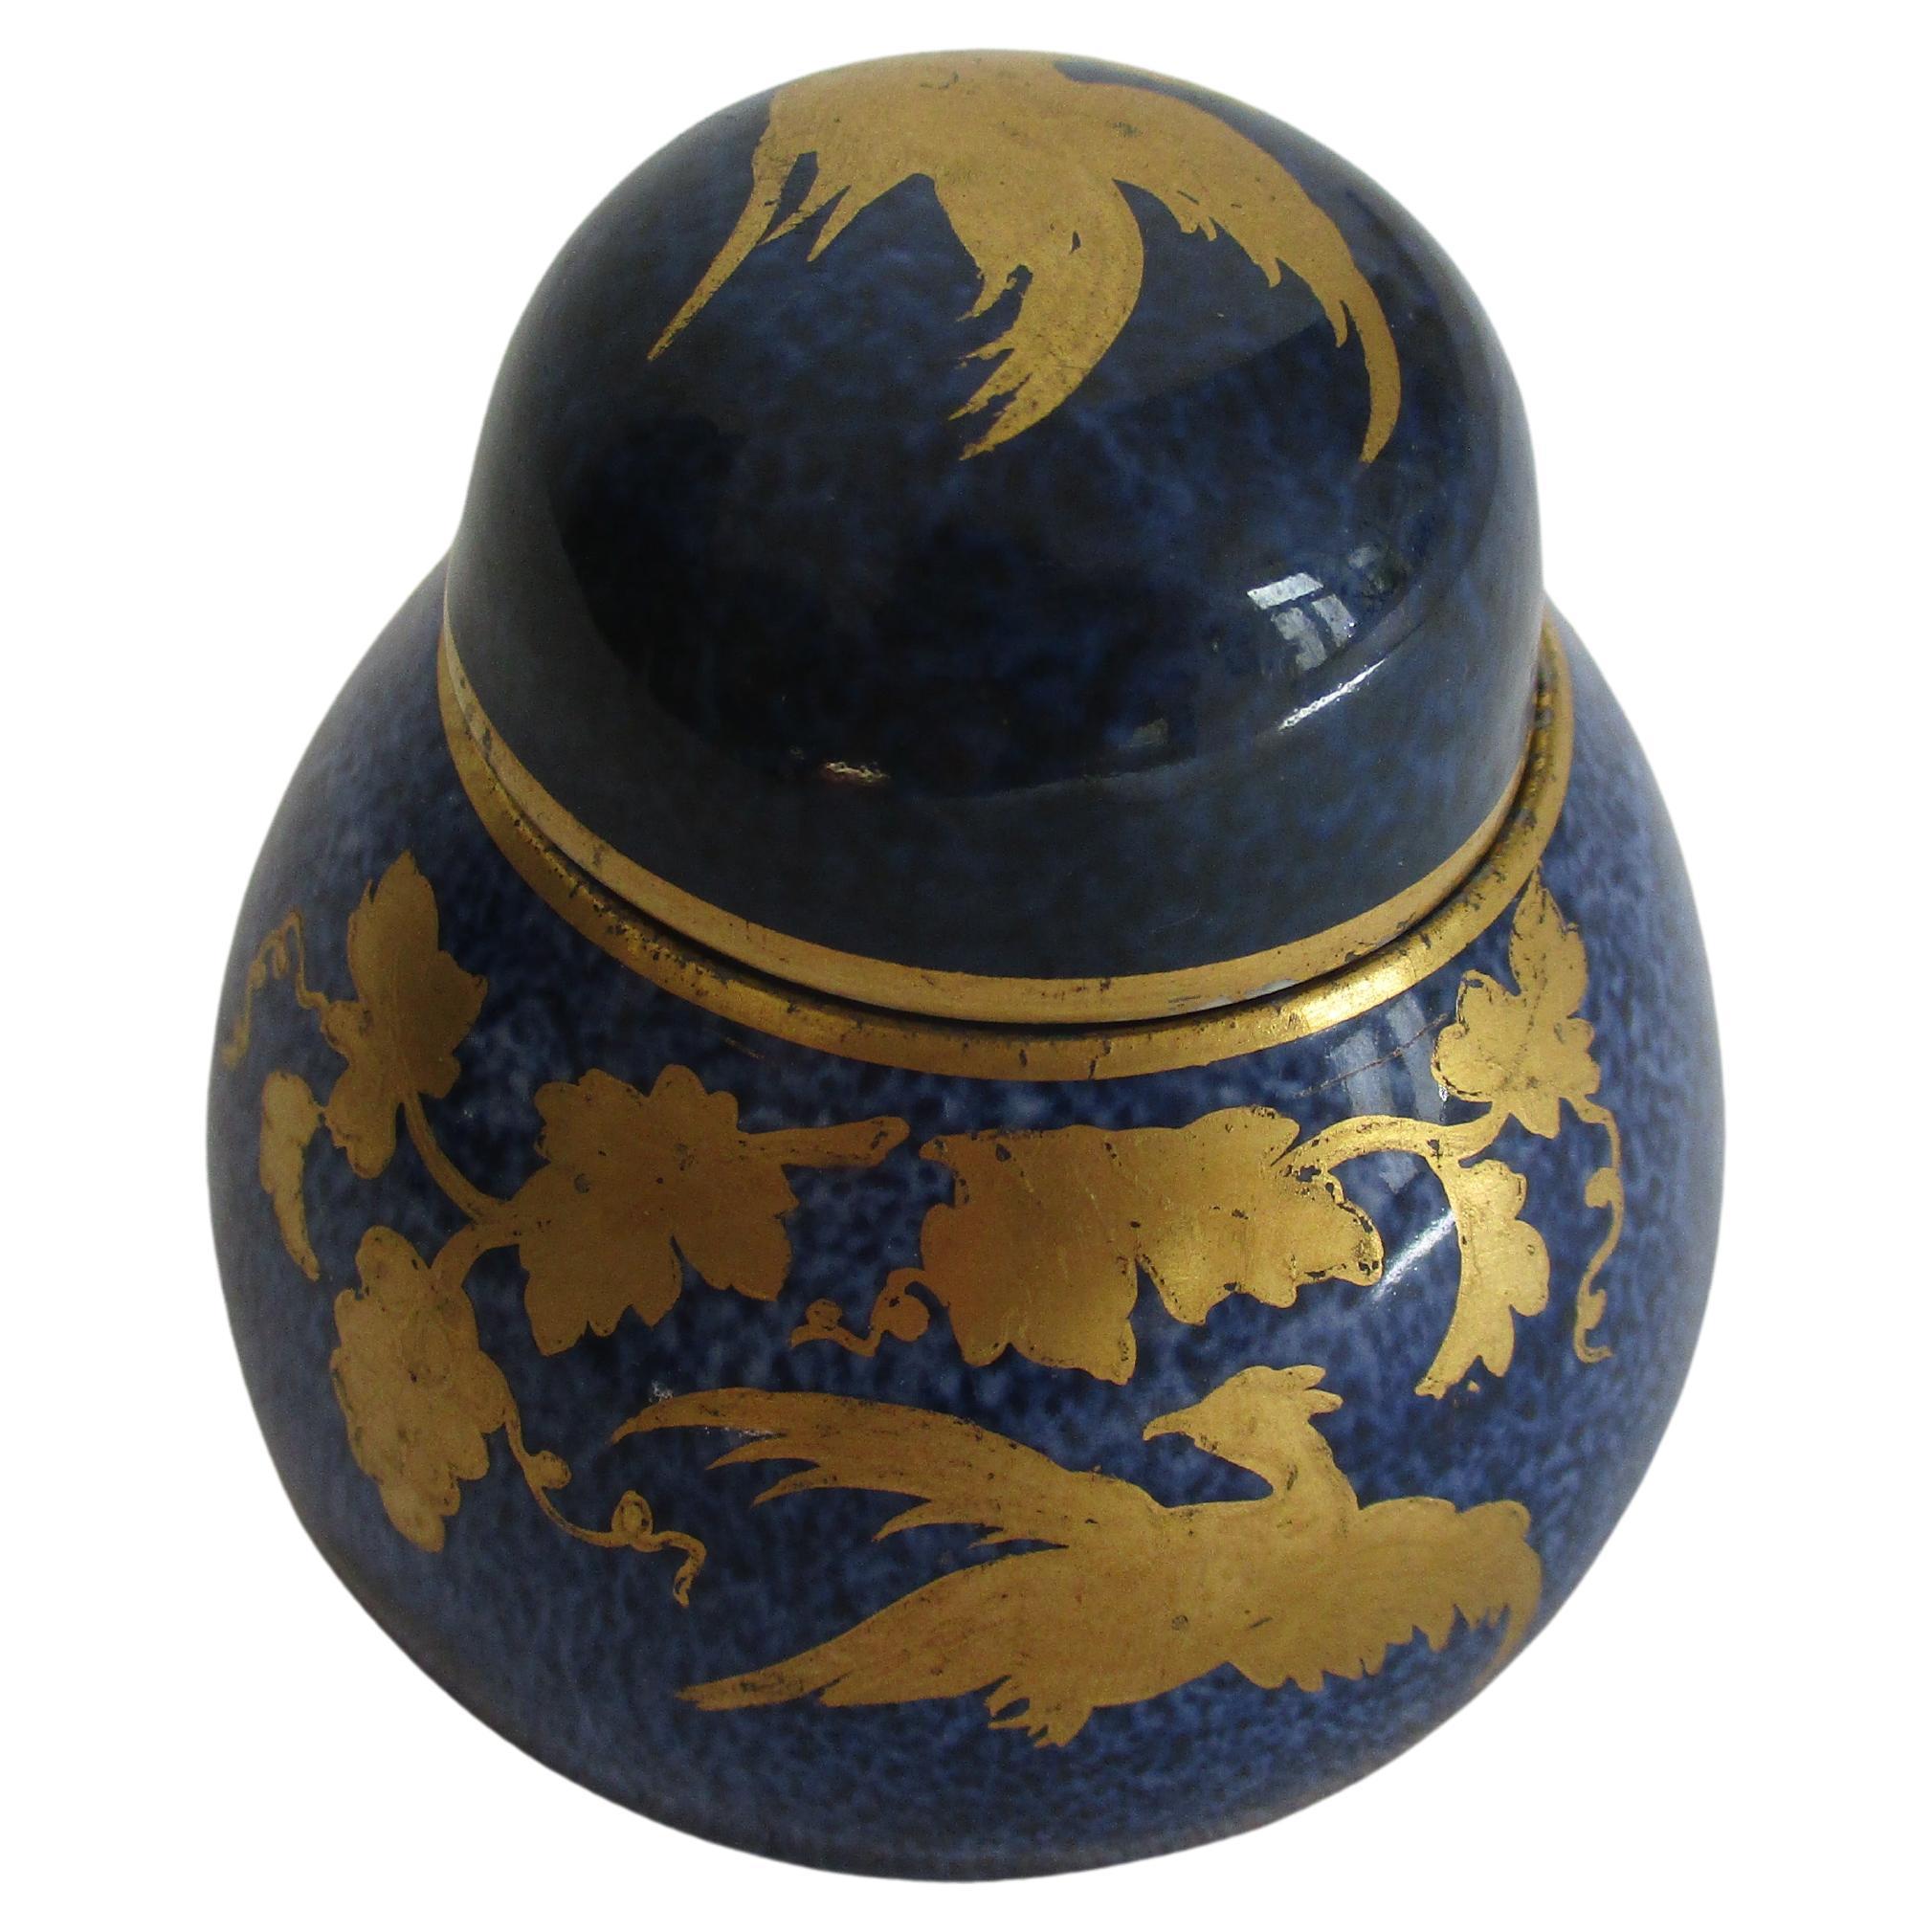 Blue and Gold Porcelain Inkwell By Crown Stafforshire